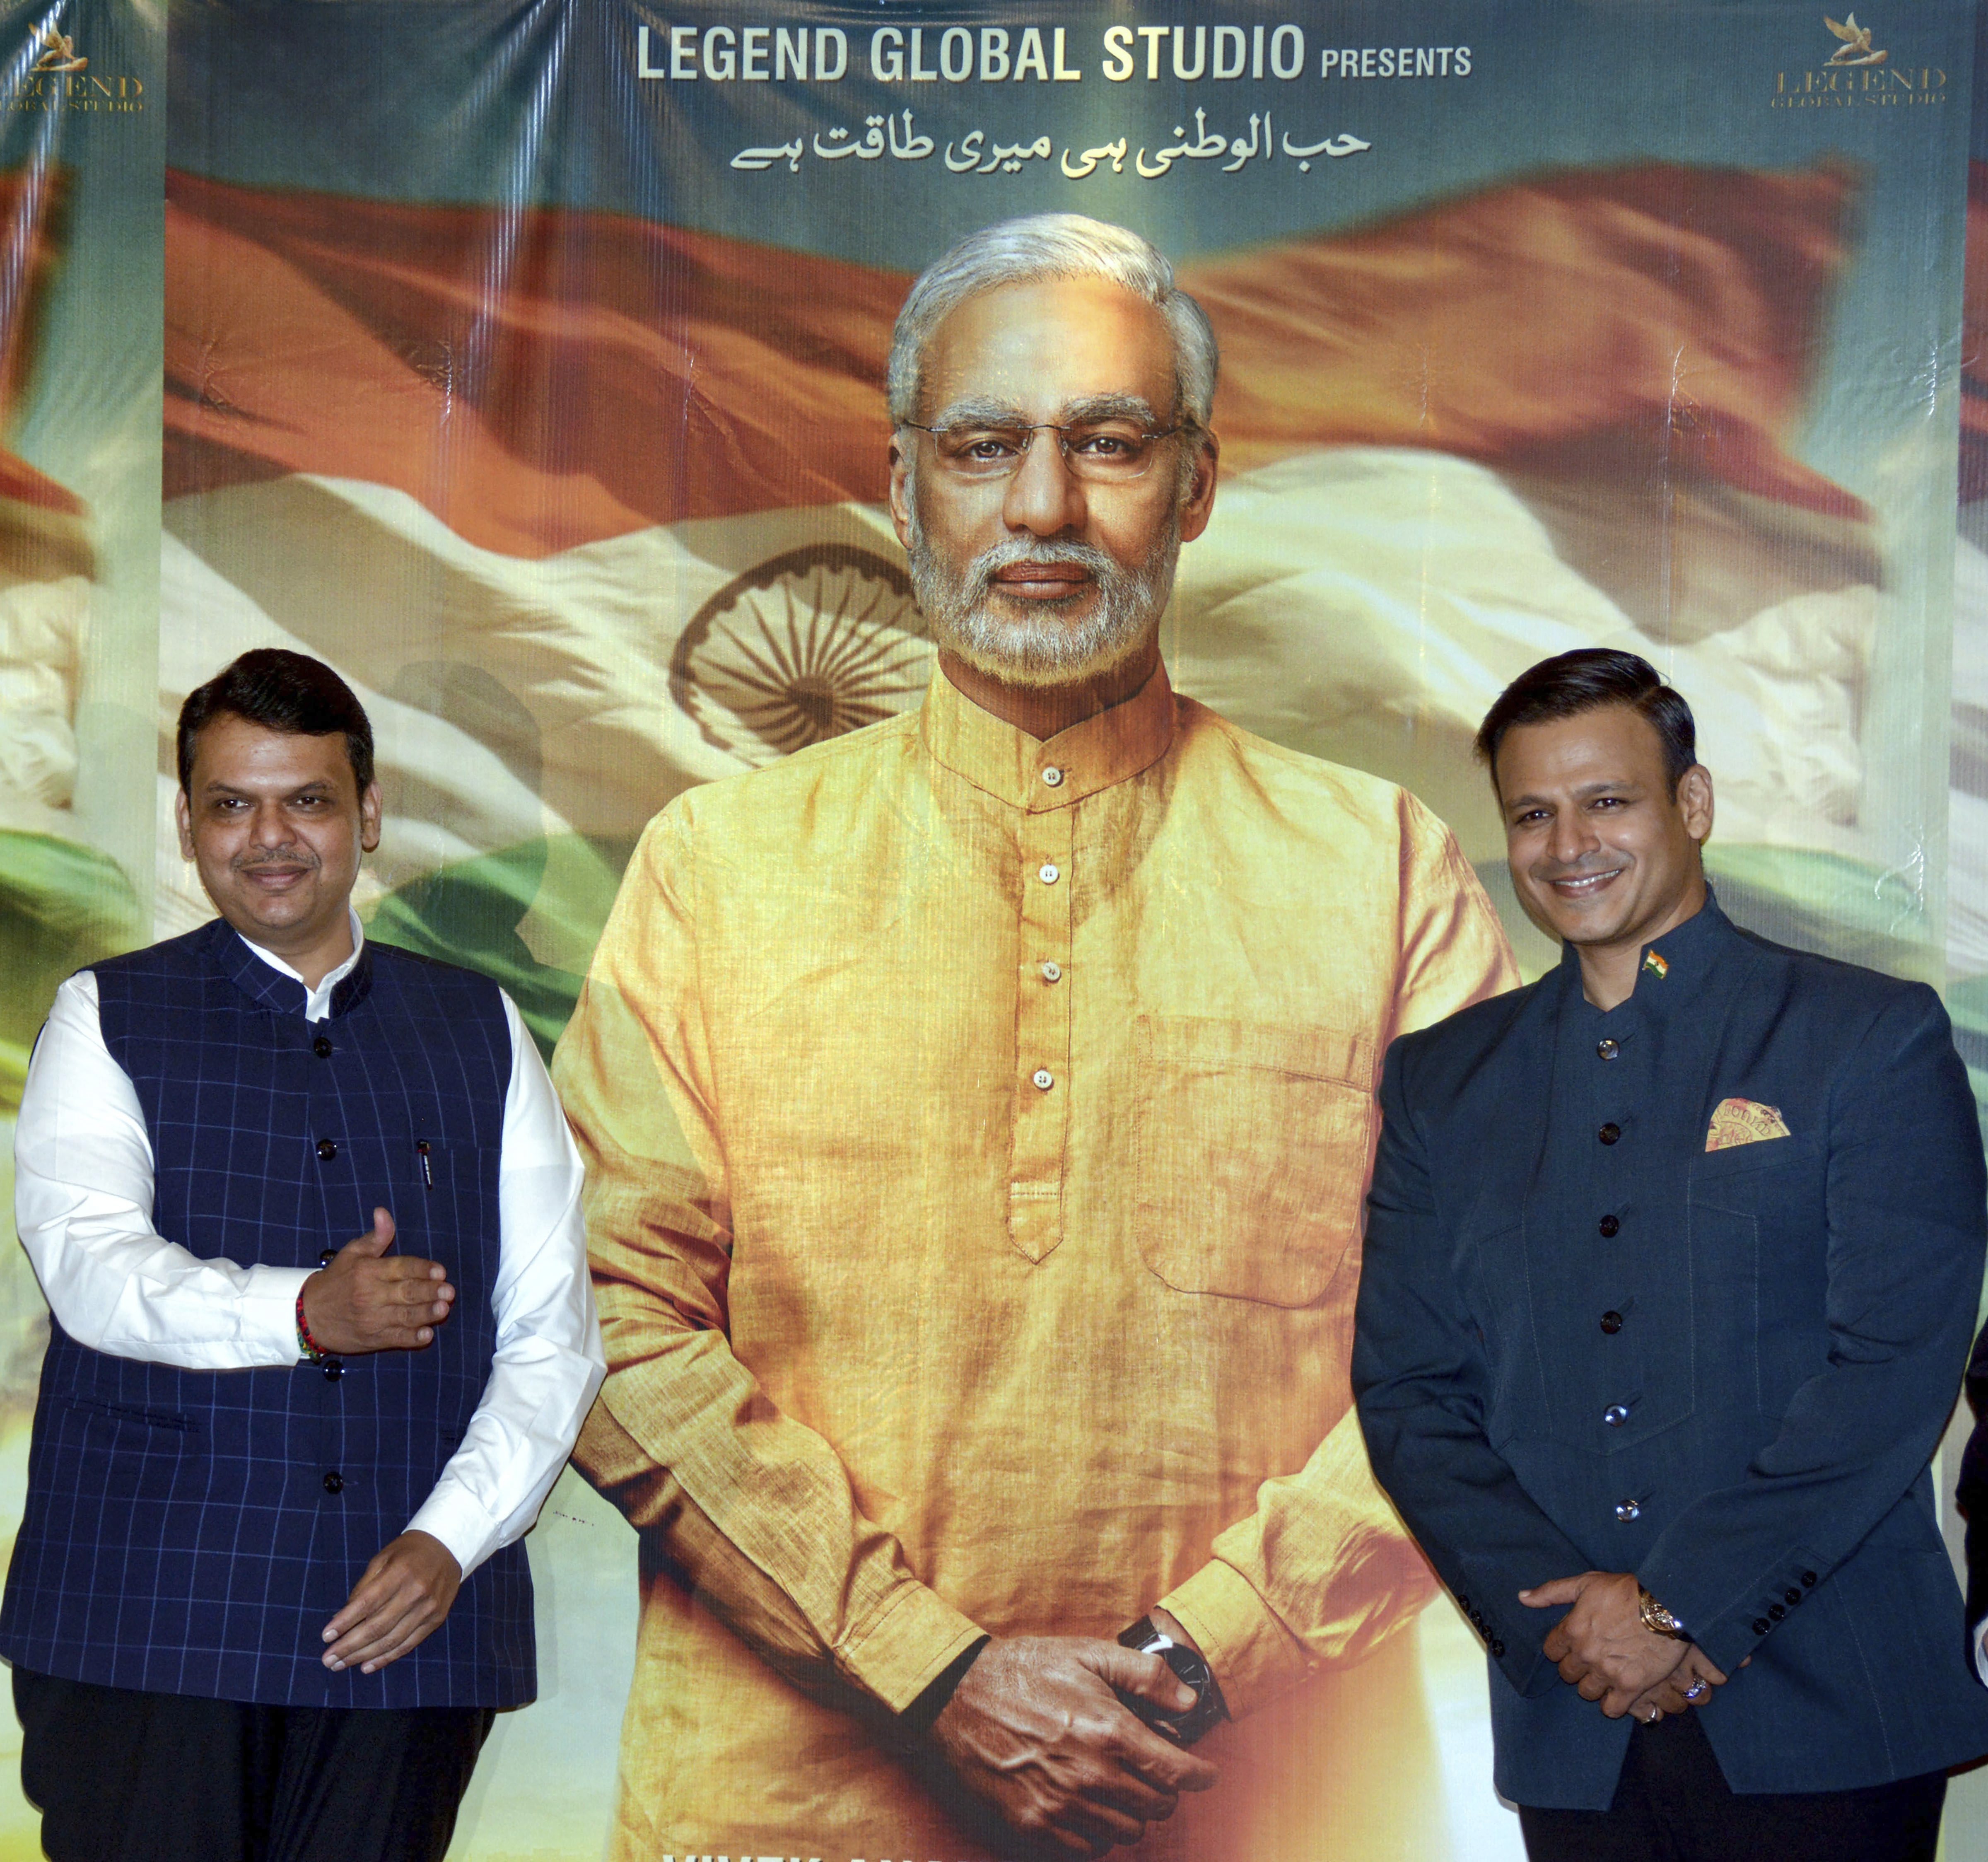 Maharashtra Chief Minister Devendra Fadnavis and Bollywood actor Vivek Oberoi pose for photos after the poster launch of Prime Minister Narendra Modi's biopic, in Mumbai - PTI